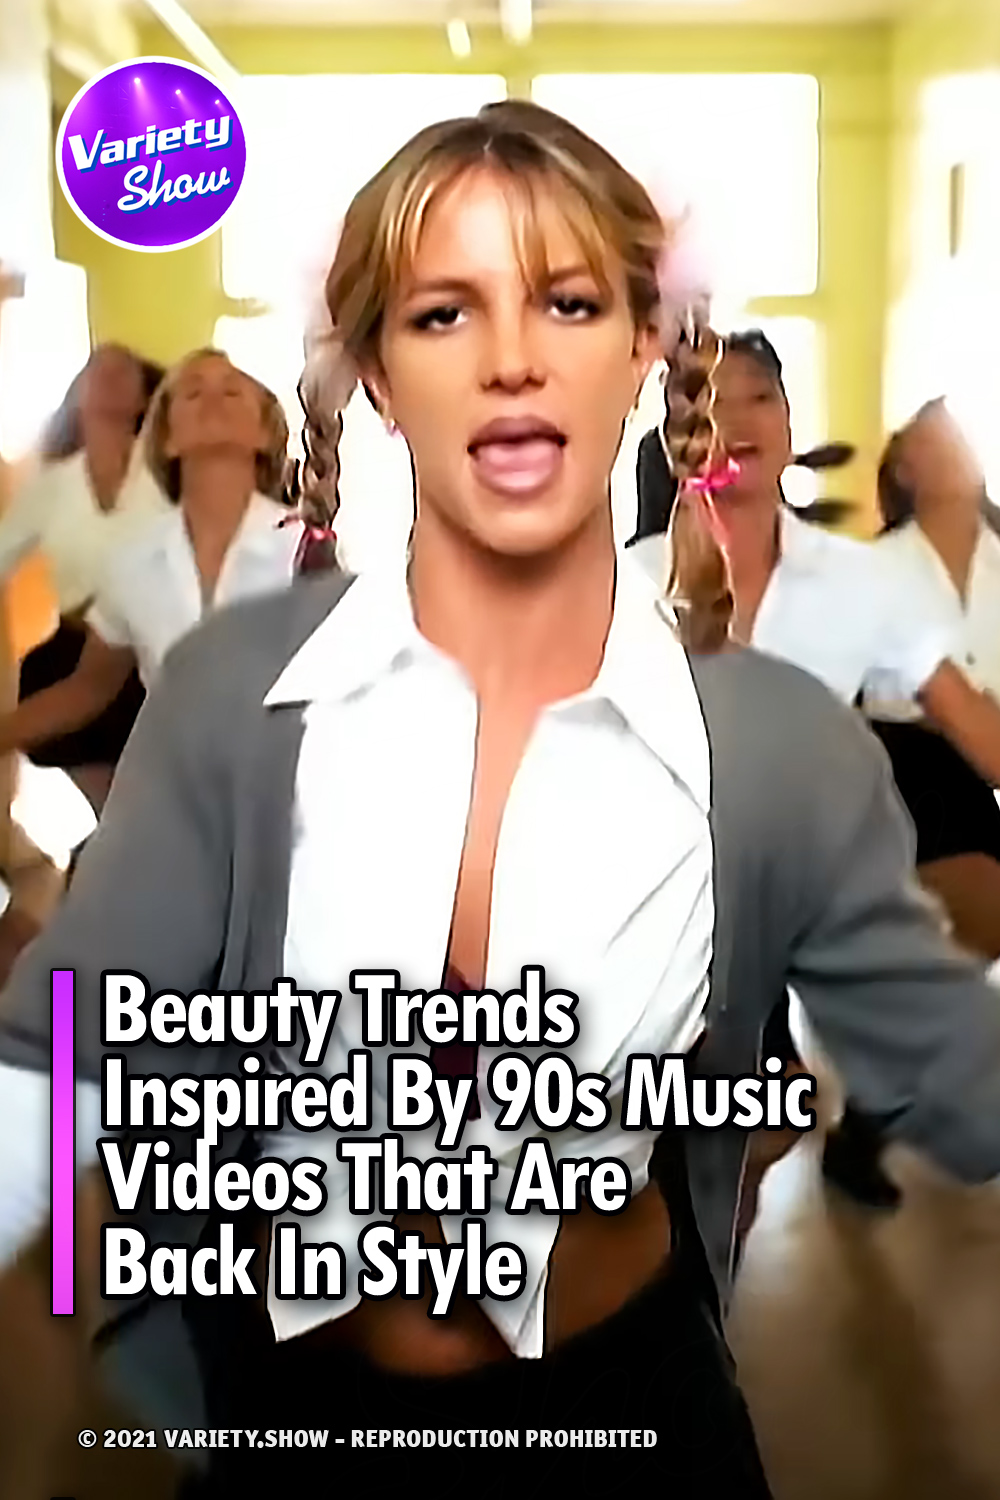 Beauty Trends Inspired By 90s Music Videos That Are Back In Style